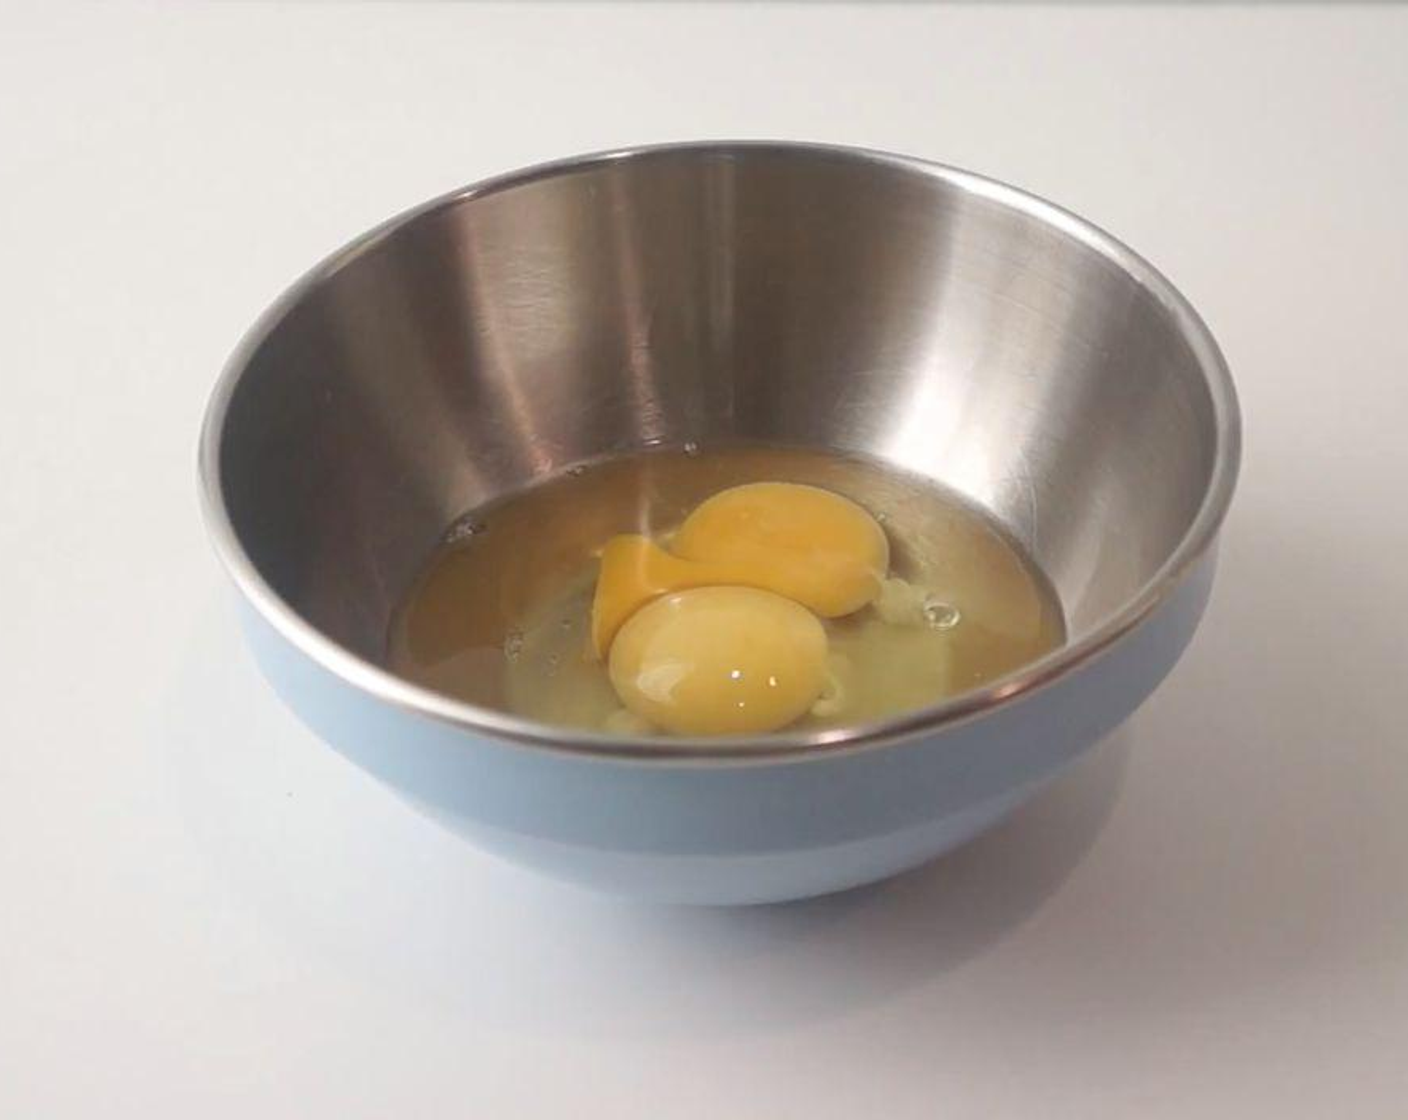 step 1 In a bowl, beat the Eggs (2) and add the Baking Powder (1 tsp) and combine.